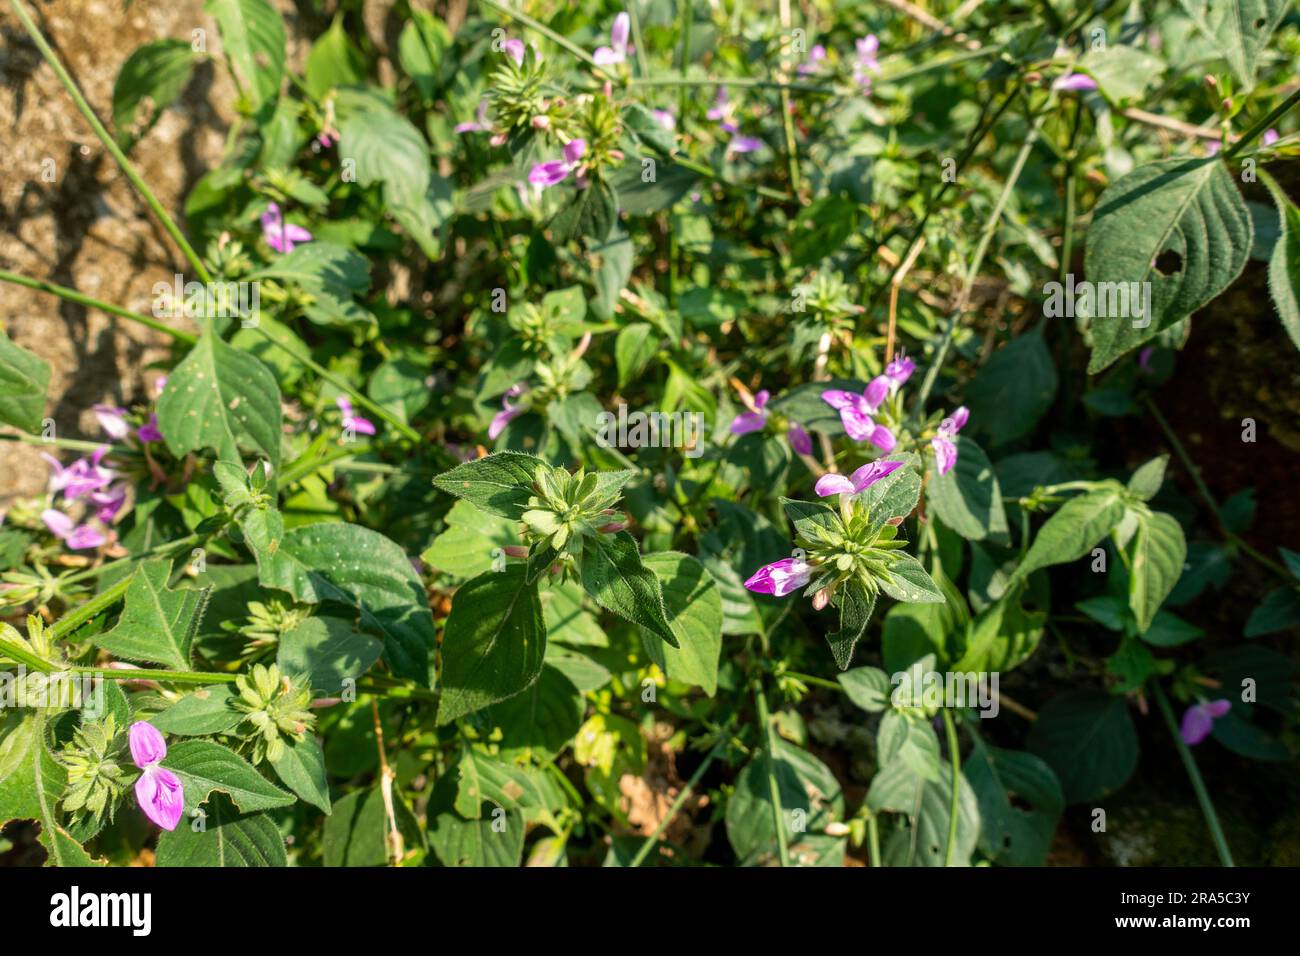 Dicliptera brachiata (Branched foldwing) wild flowers and leaves. India Stock Photo